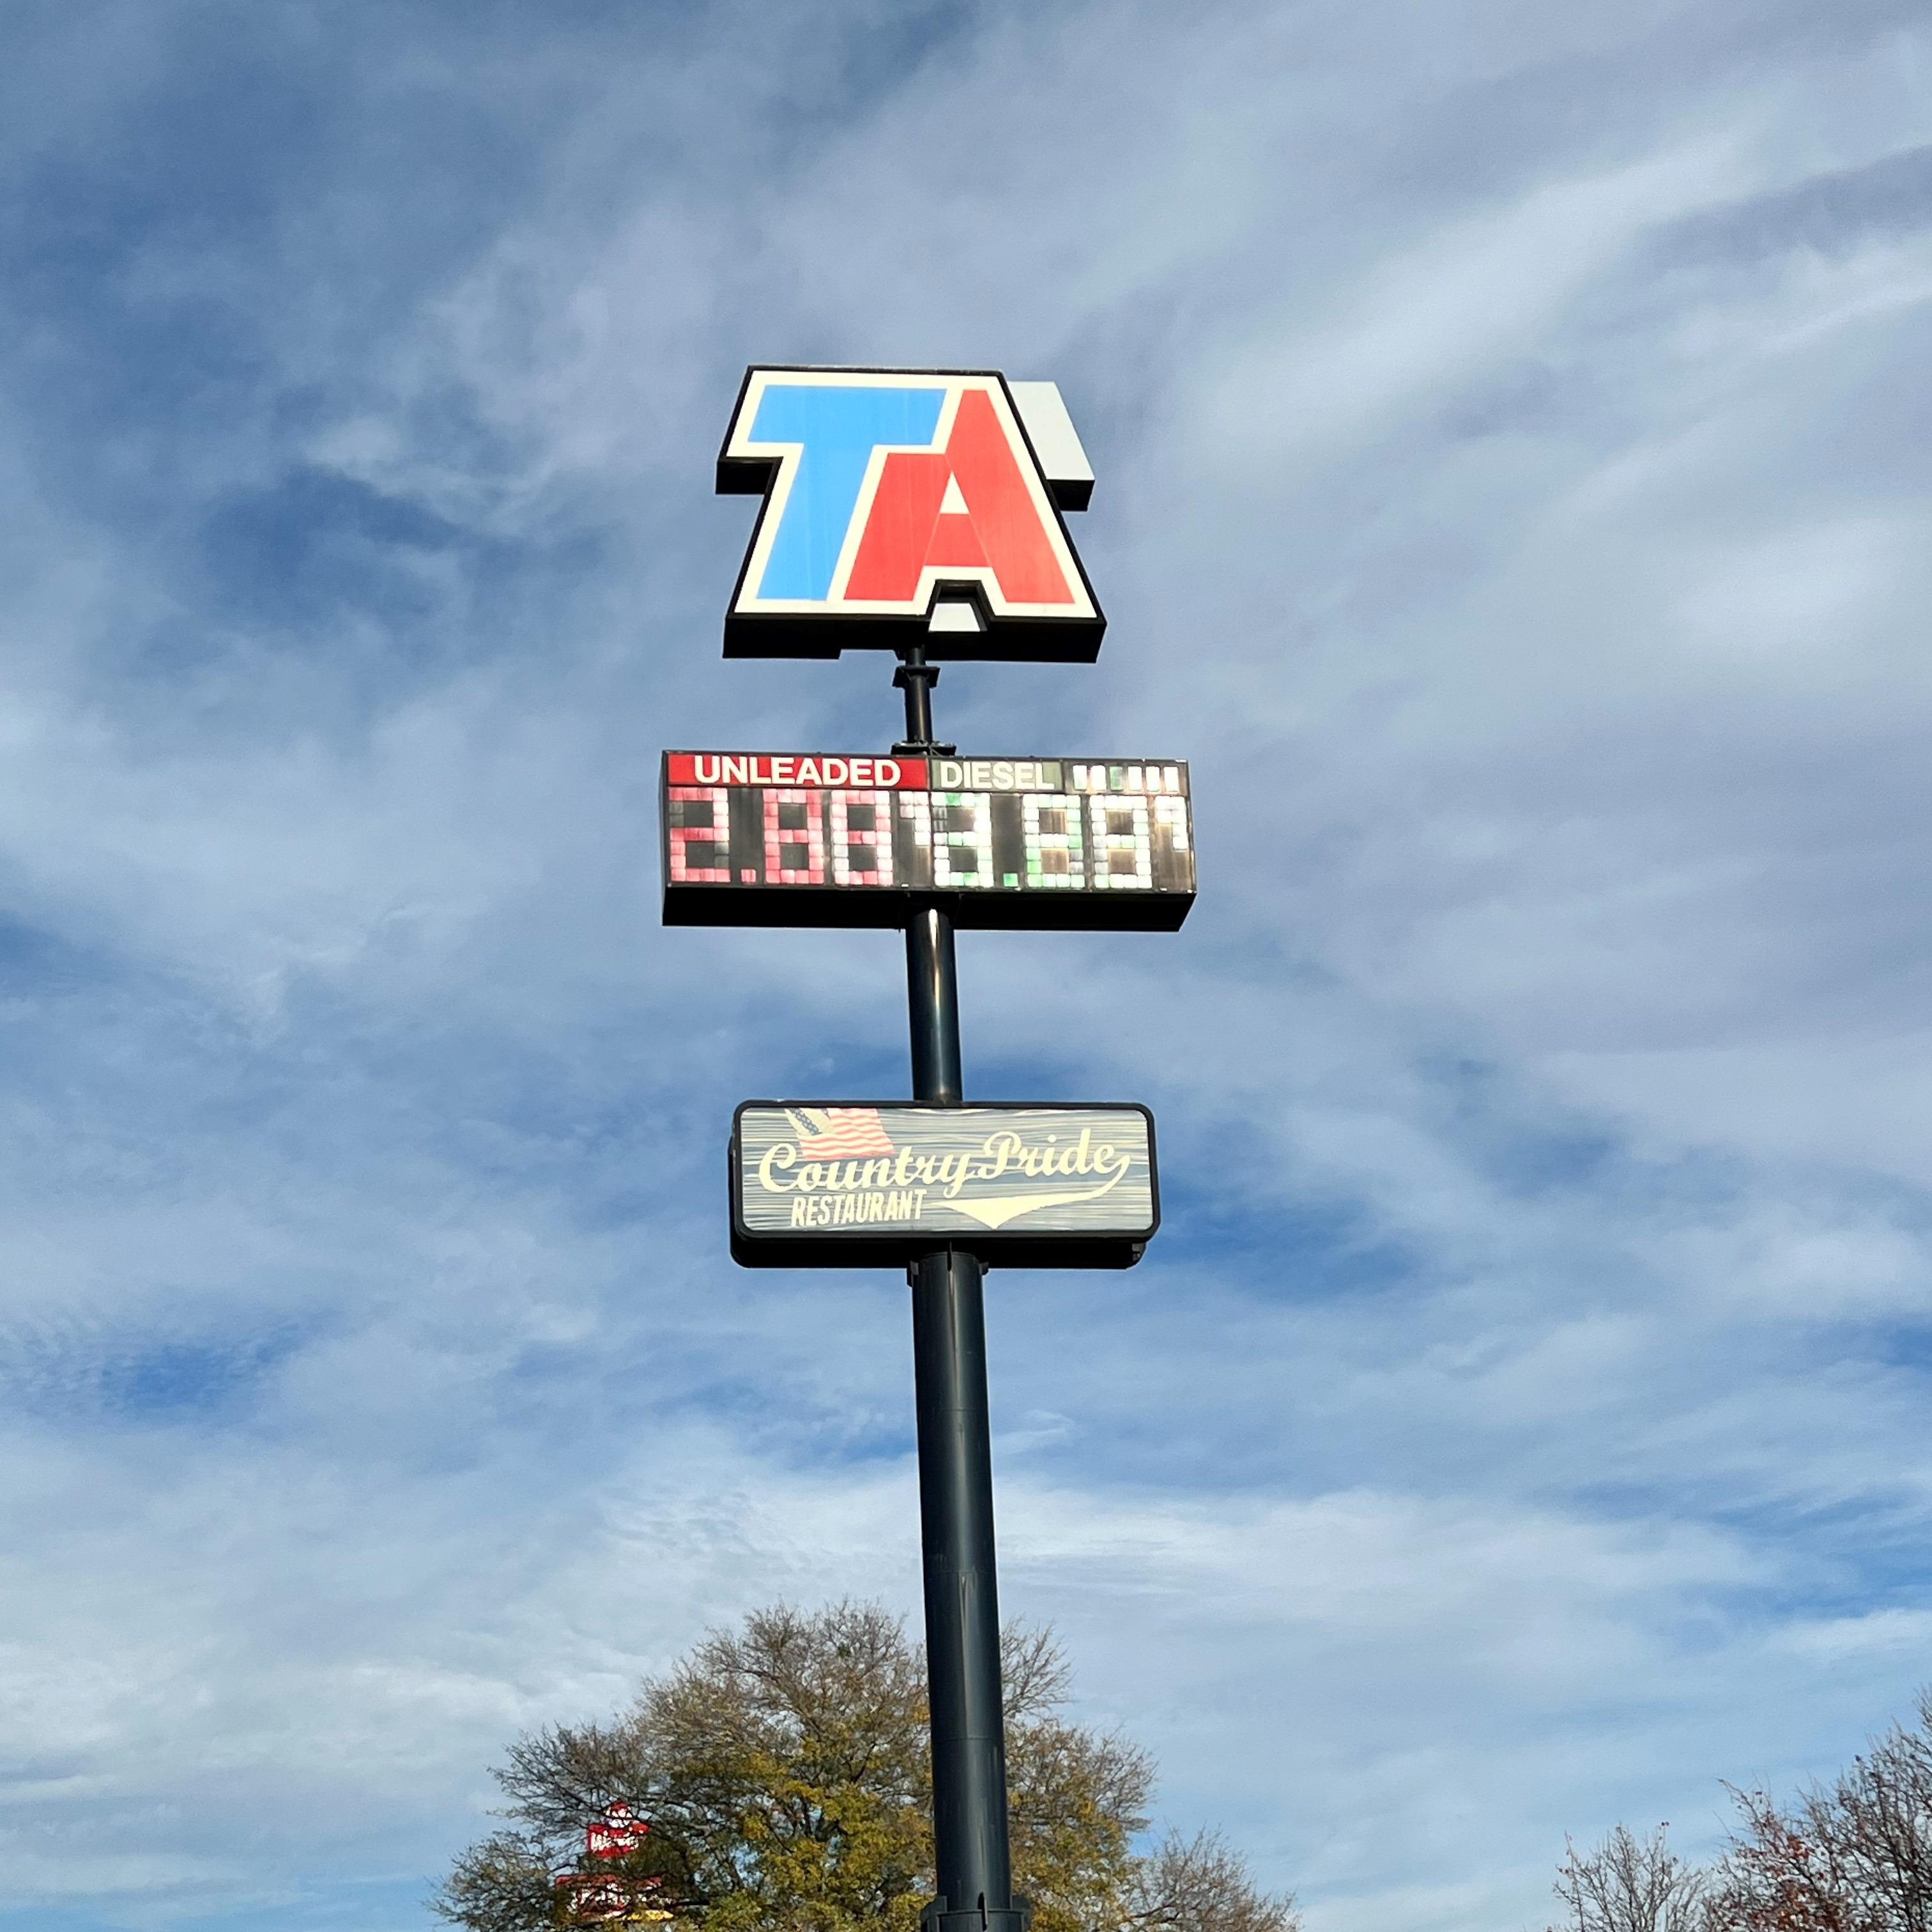 TravelCenters of America Travel Stores offer convenient, one-stop shopping with prices as low as, or lower, than our competition.